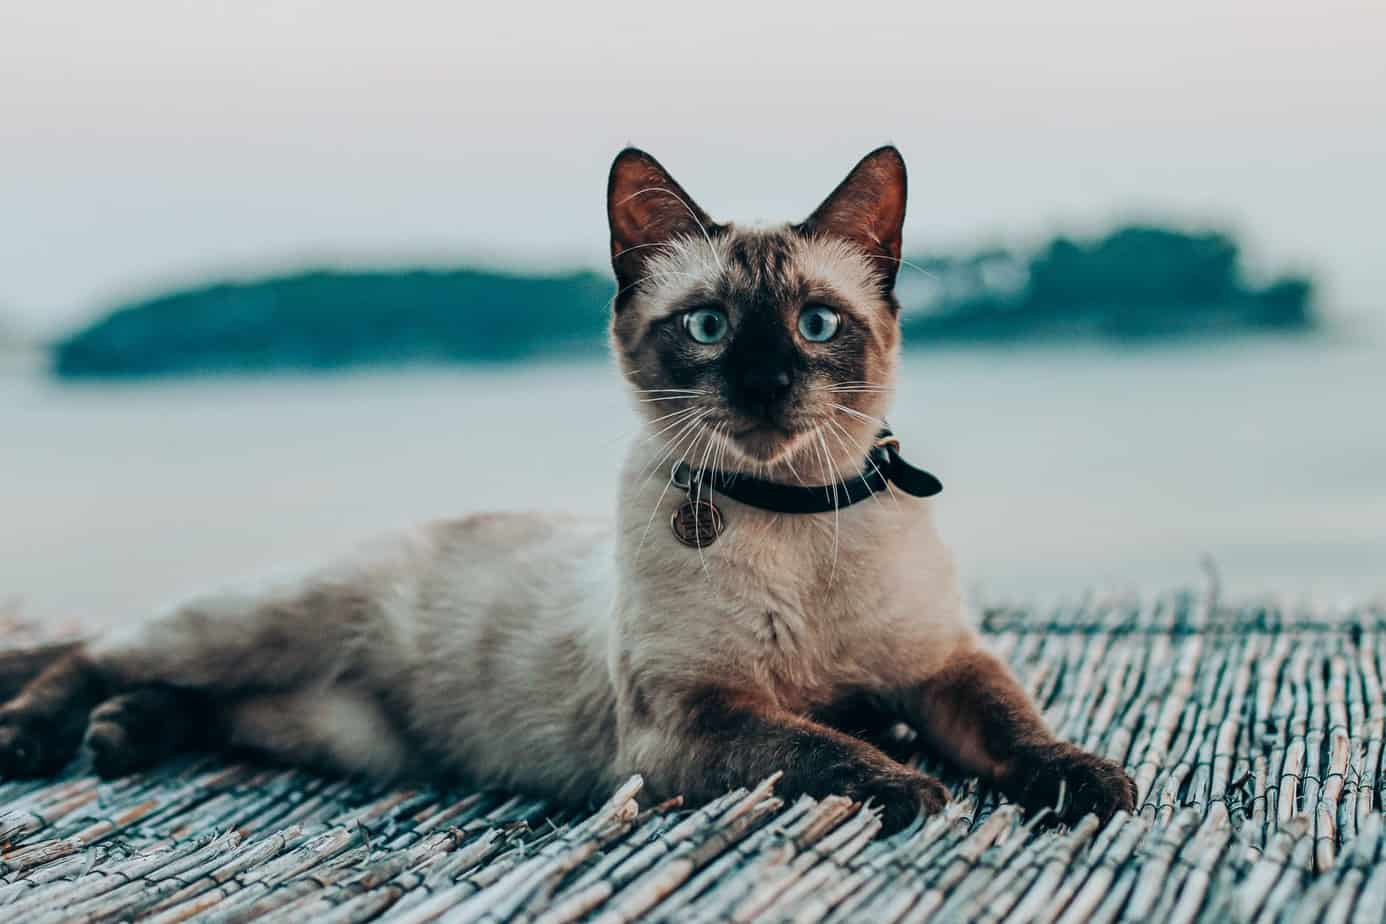 Why are Siamese cats so vocal?